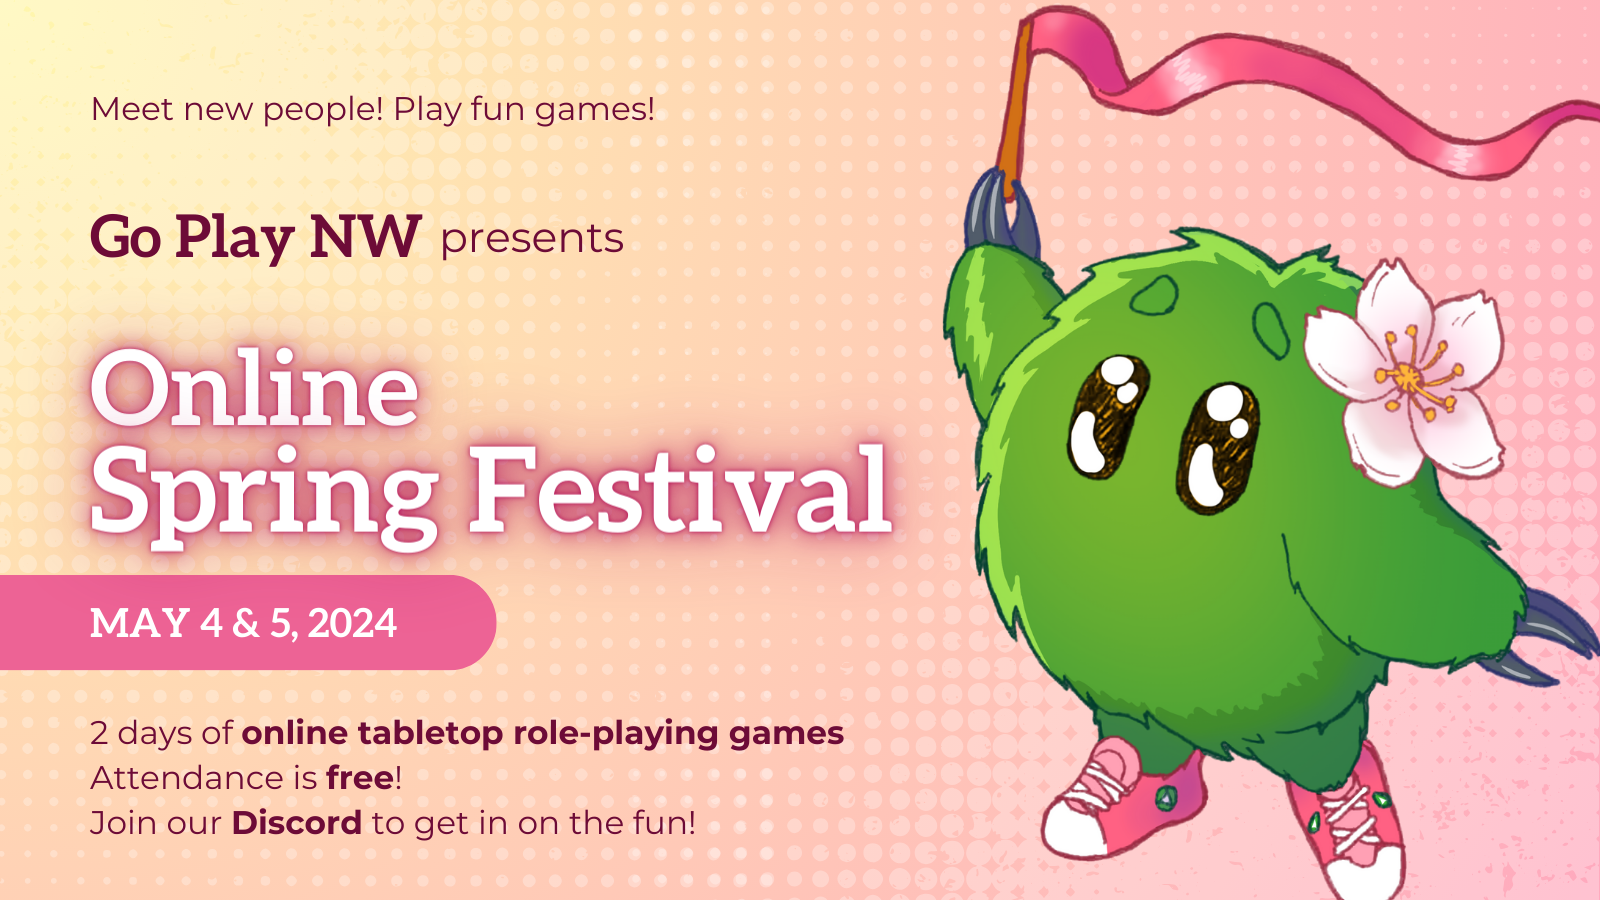 Go Play NW presents Online Spring Festival, May 4–5, 2024. 2 days of online games. Attendance is free. Join our Discord to get in on the fun! Next to the text, Go the fuzzy green creature wears a cherry blossom in its hair and waves a pink satin ribbon.